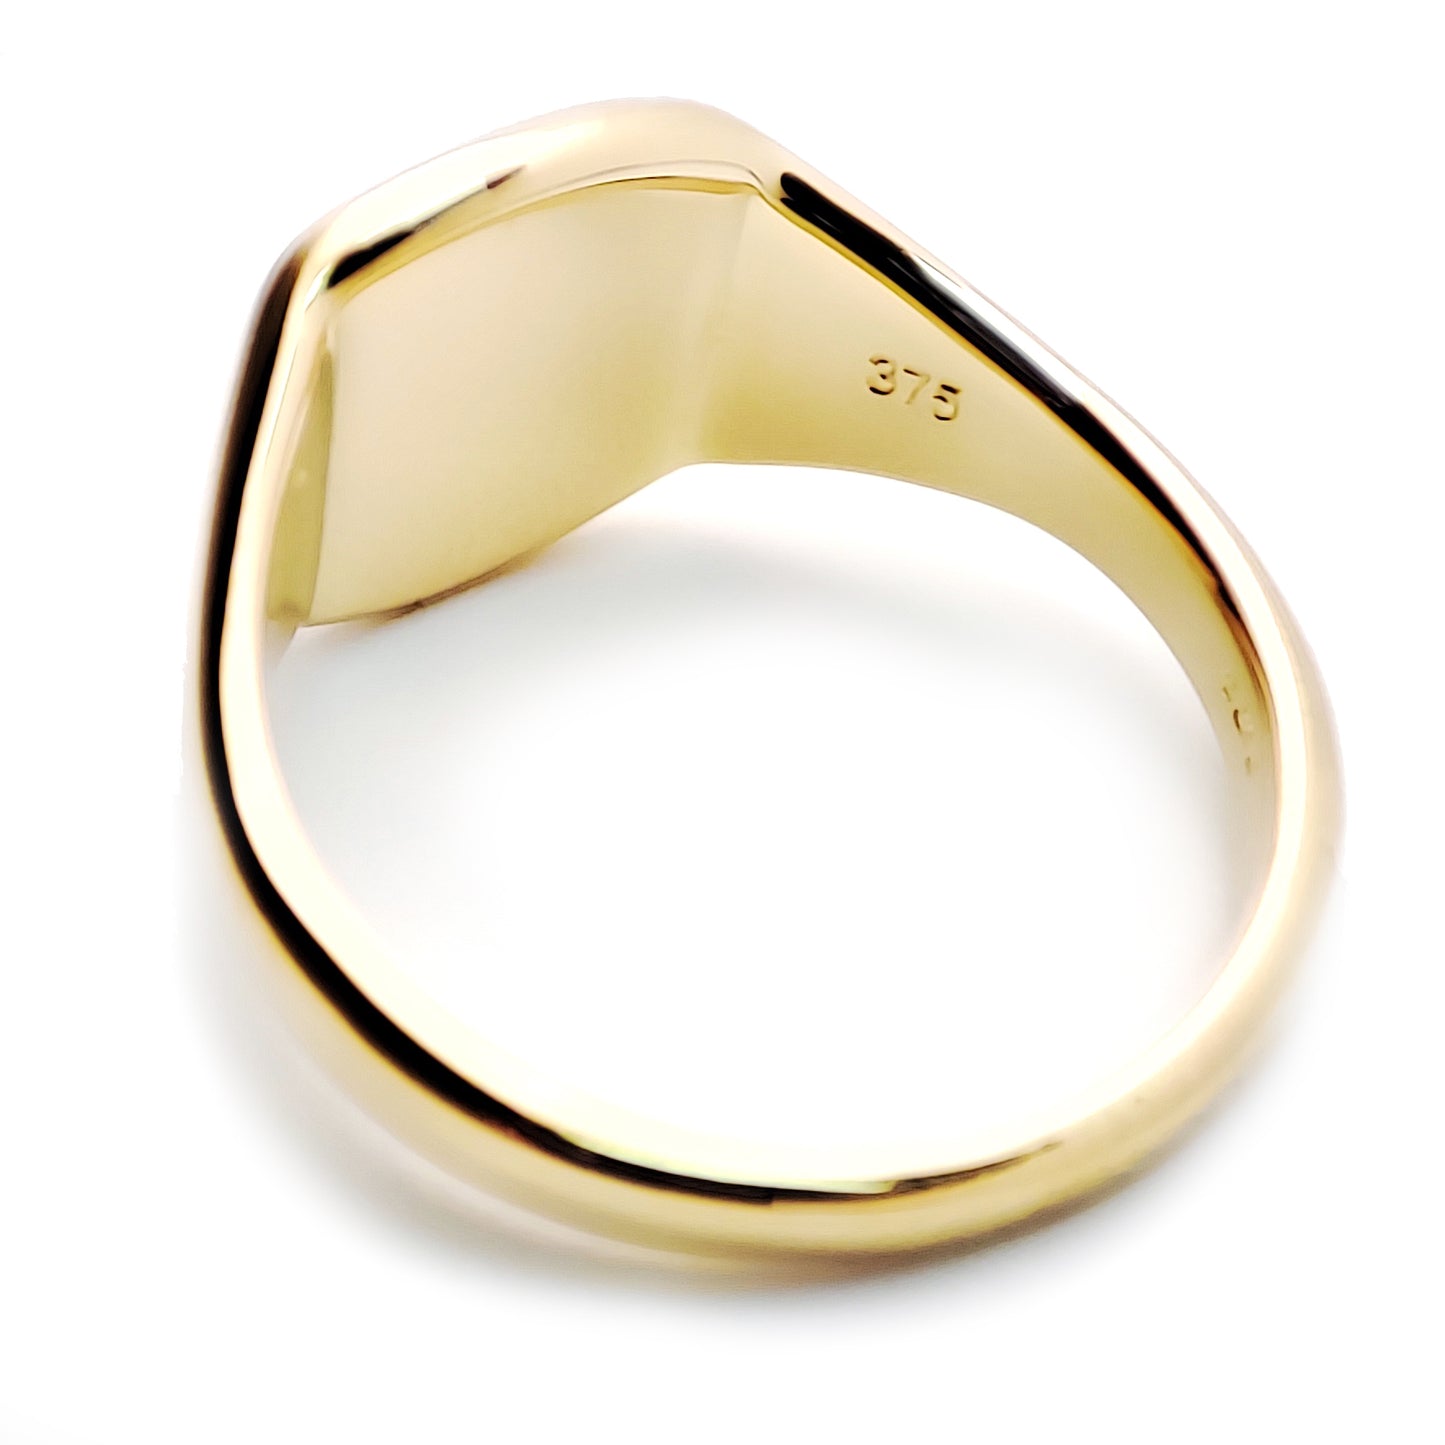 Mens Solid 9ct Gold  Square Cushion Signet Ring - JRN140